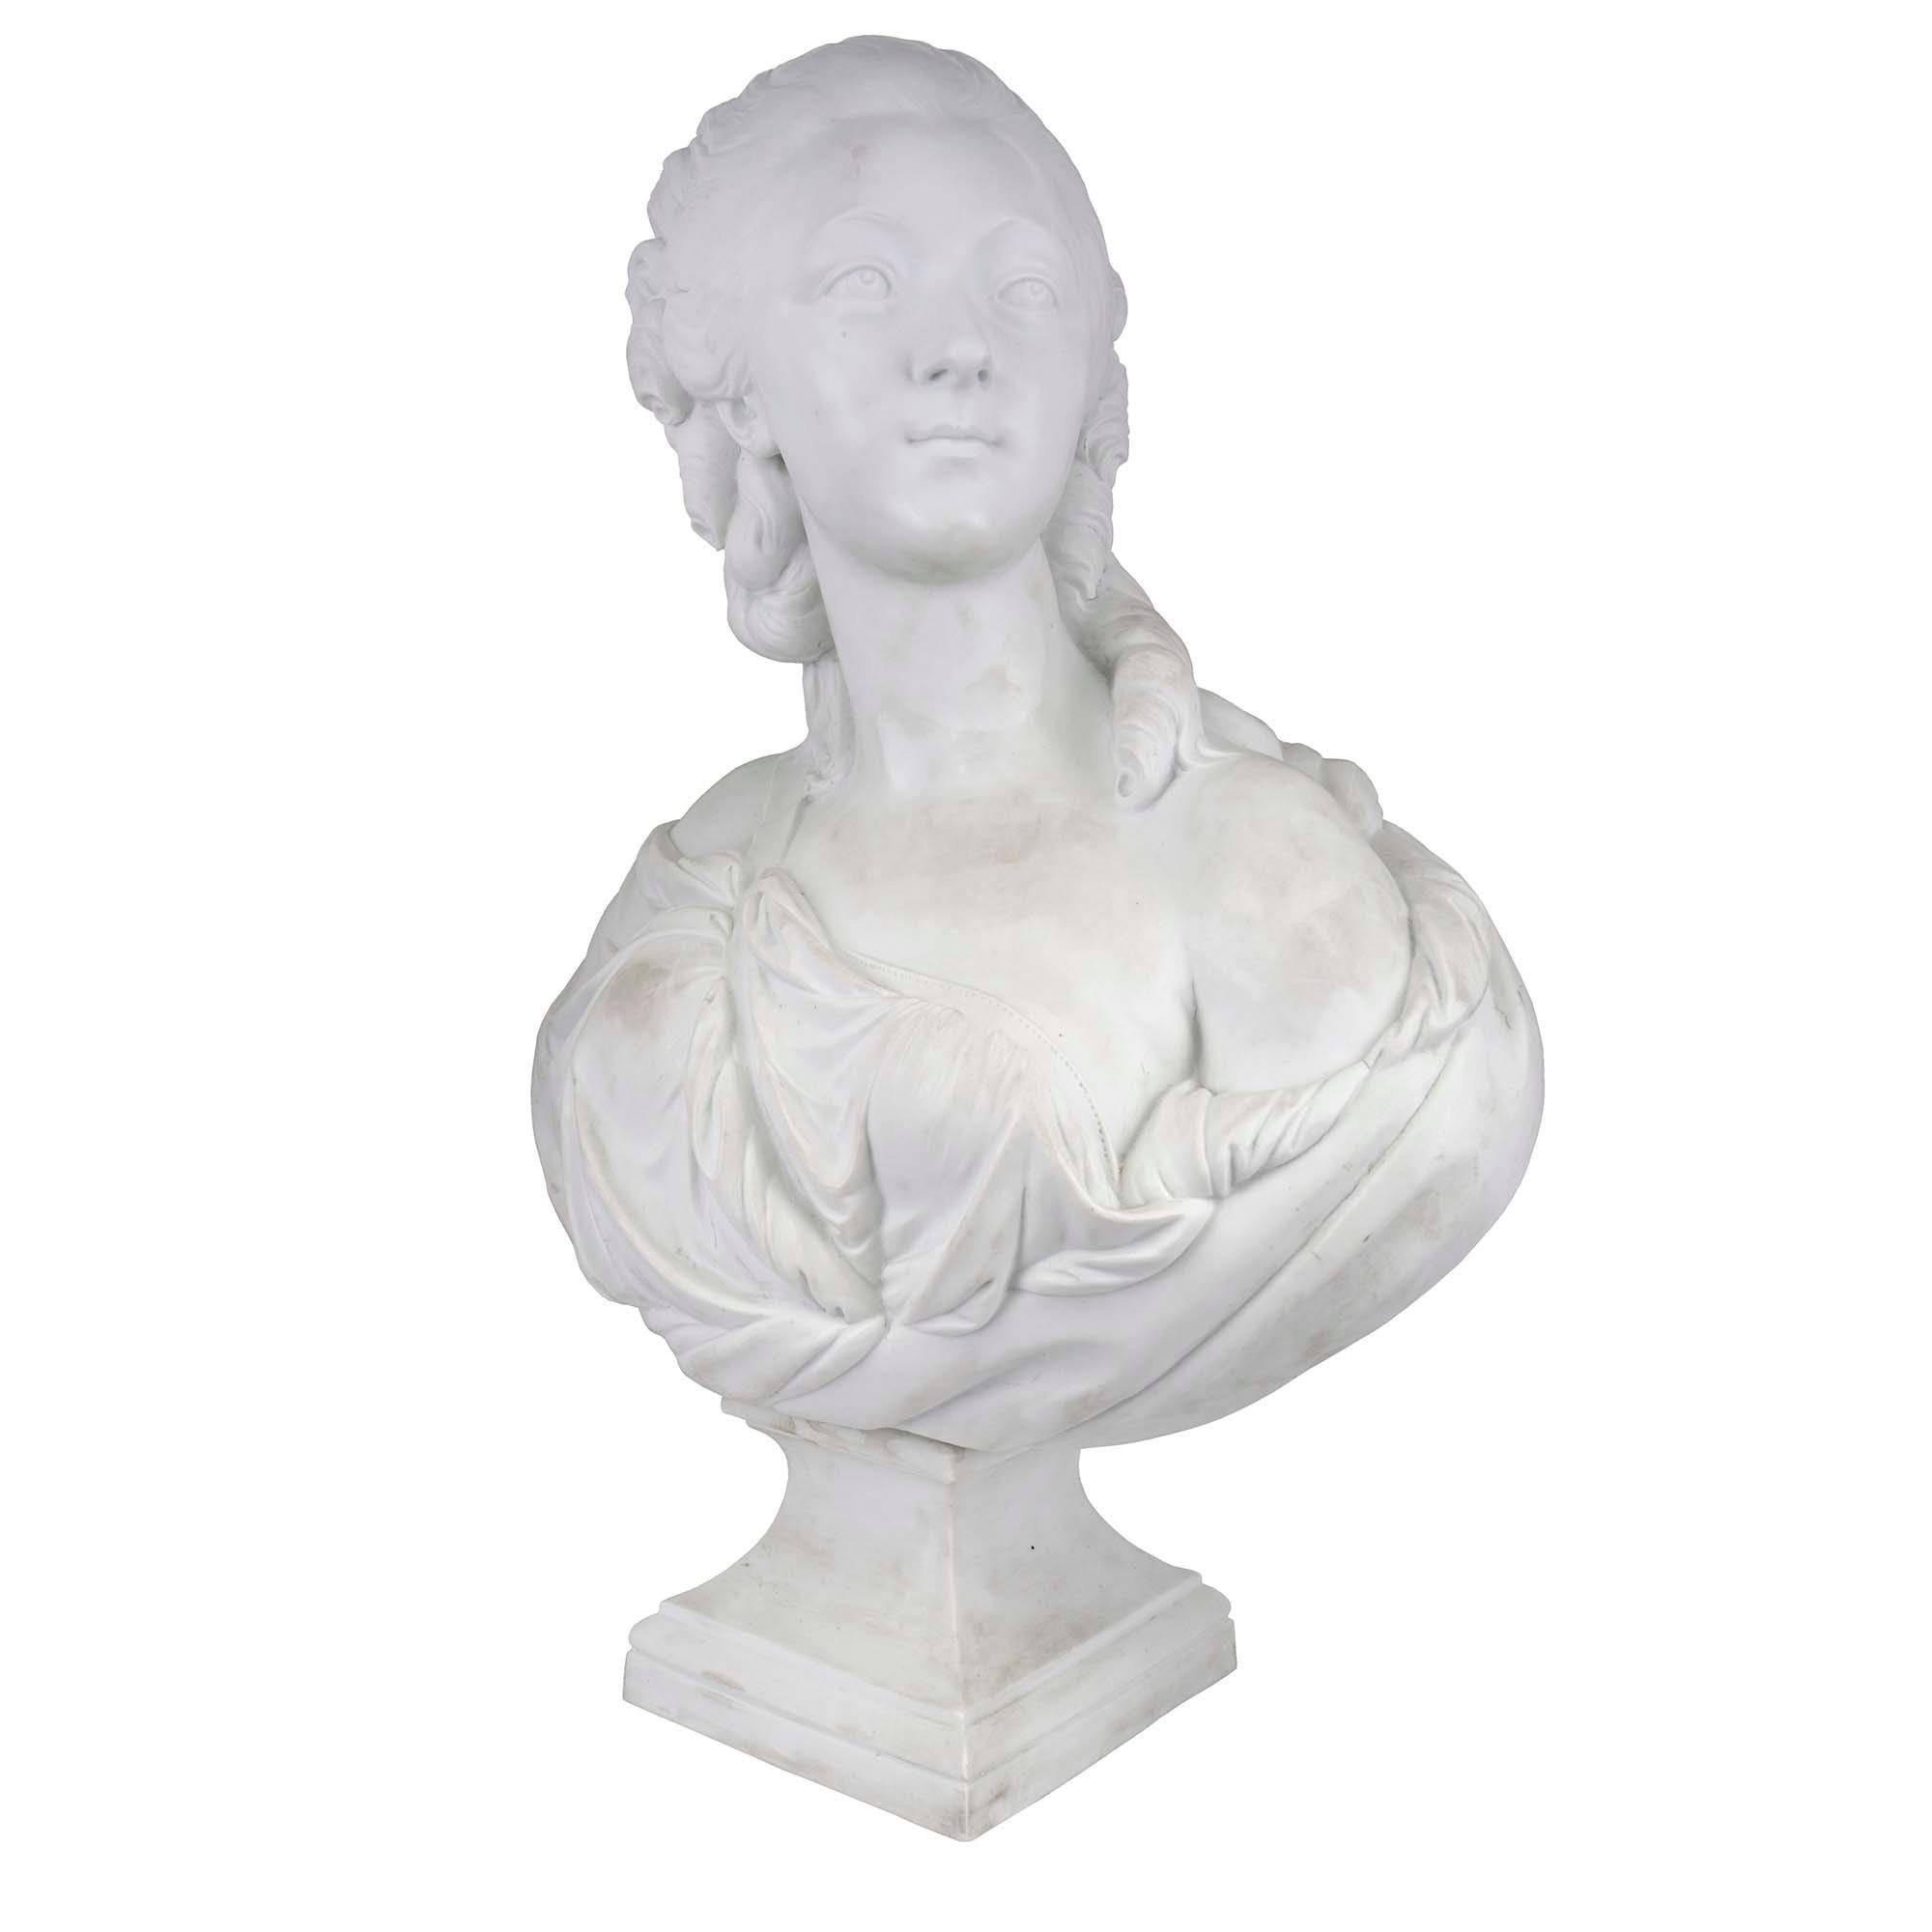 A large-scale French 19th century Louis XVI st. Biscuit de Sèvres Porcelain bust of Madame La Contesse Du Bary in the manner of the sculptor Pajou. The bust is raised by a square socle with a mottled border. The Contesse in draped in classical dress